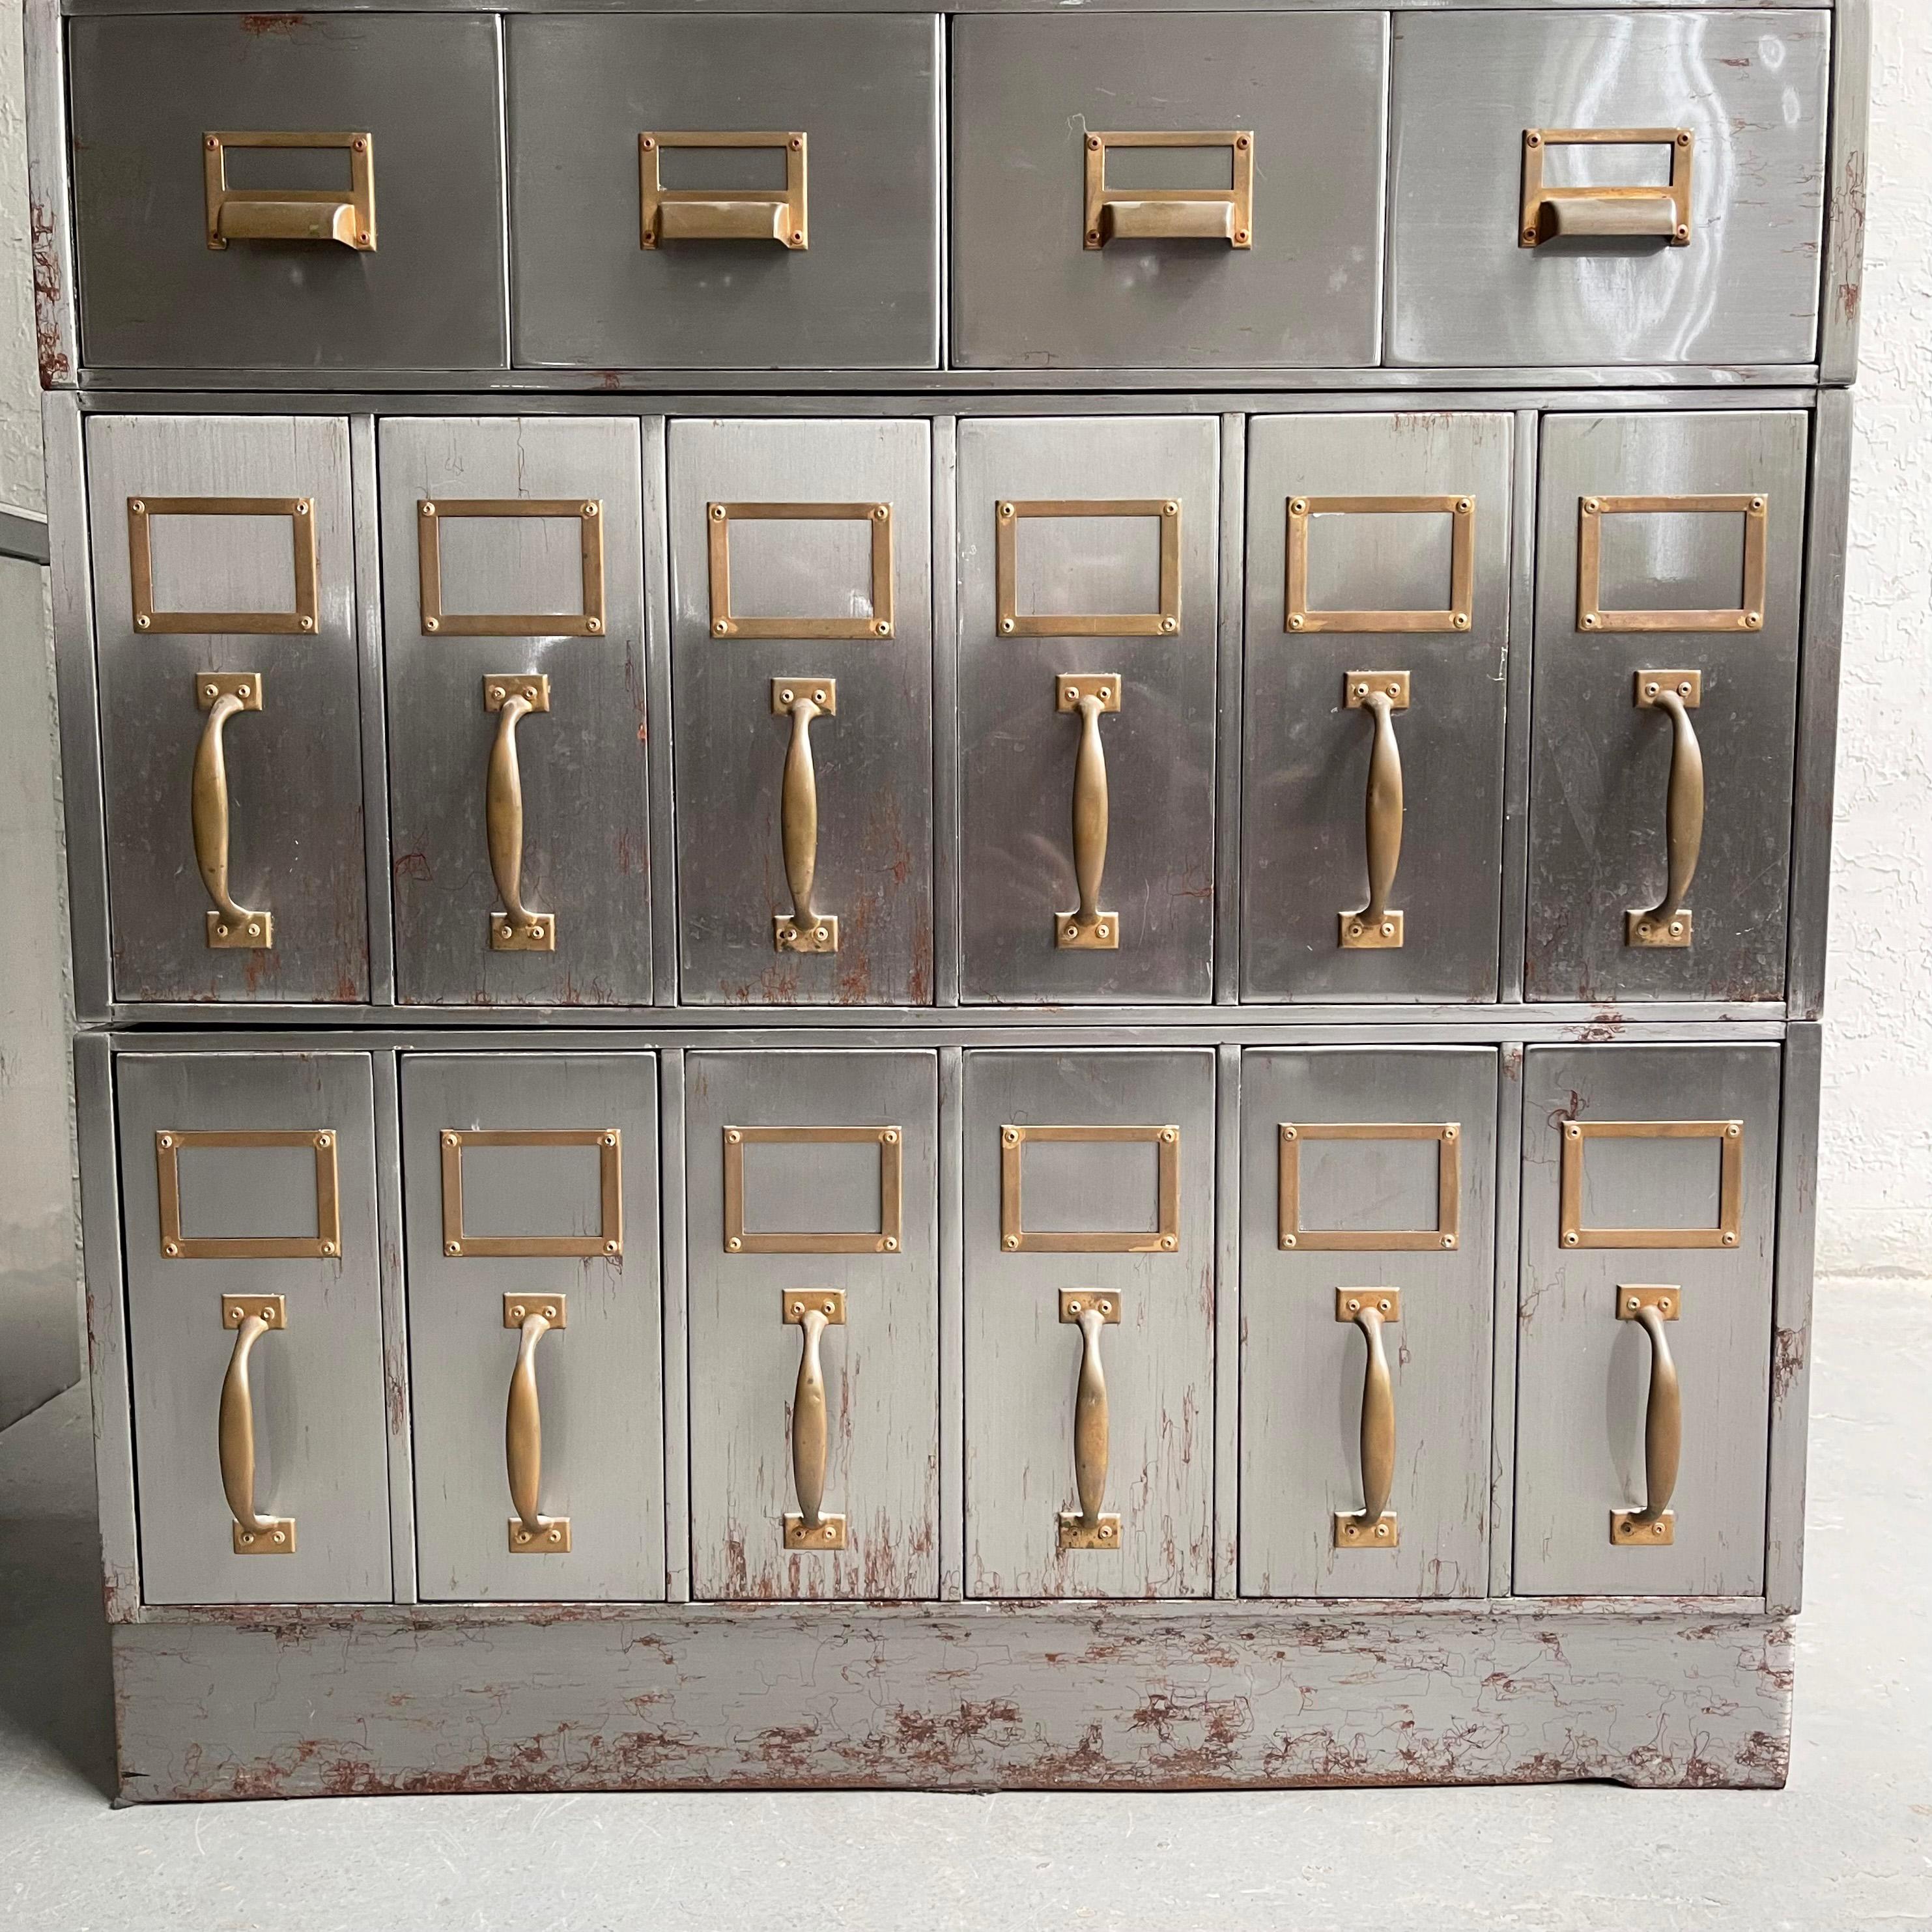 20th Century Industrial Allsteel Tall Multiple Drawer Filing Cabinet